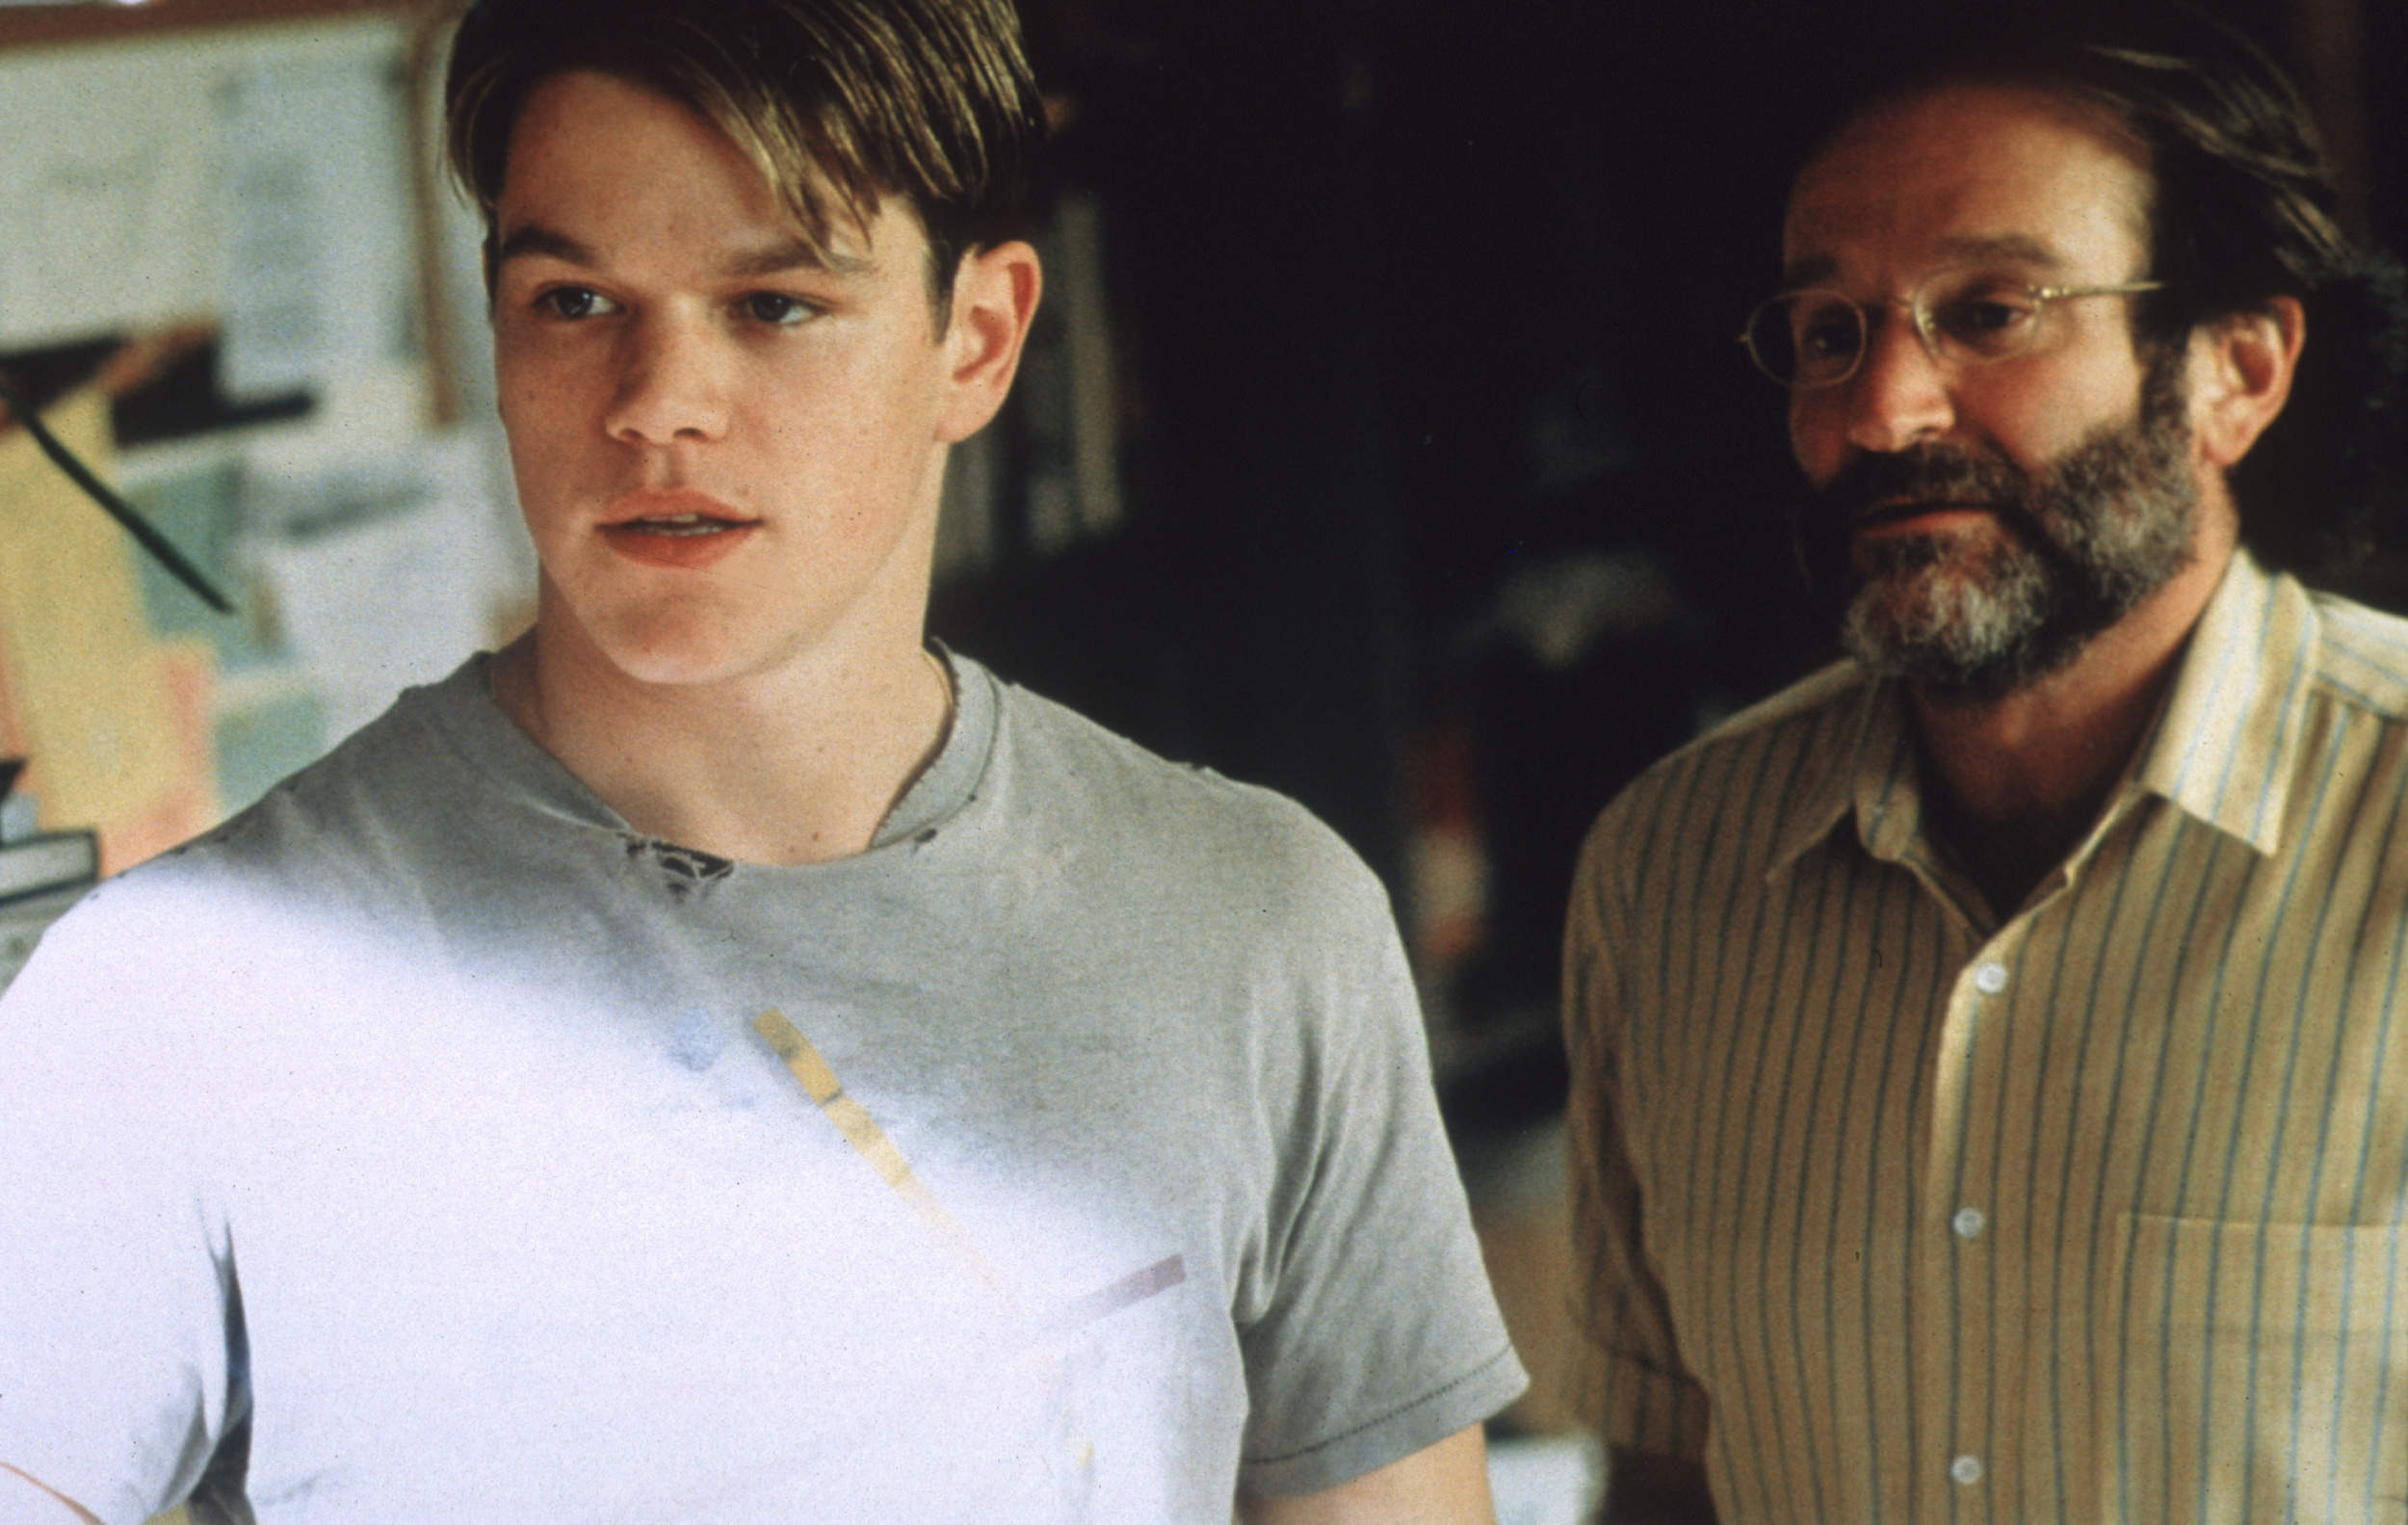 <p>In addition to raking in the box-office cash, “Good Will Hunting” racked up Oscar nominations galore. It was nominated for nine awards. Matt Damon and Minnie Driver got acting nominations. Van Sant was up for Best Director. Additionally, “Good Will Hunting” was nominated for Best Picture.</p><p><a href='https://www.msn.com/en-us/community/channel/vid-cj9pqbr0vn9in2b6ddcd8sfgpfq6x6utp44fssrv6mc2gtybw0us'>Follow us on MSN to see more of our exclusive entertainment content.</a></p>